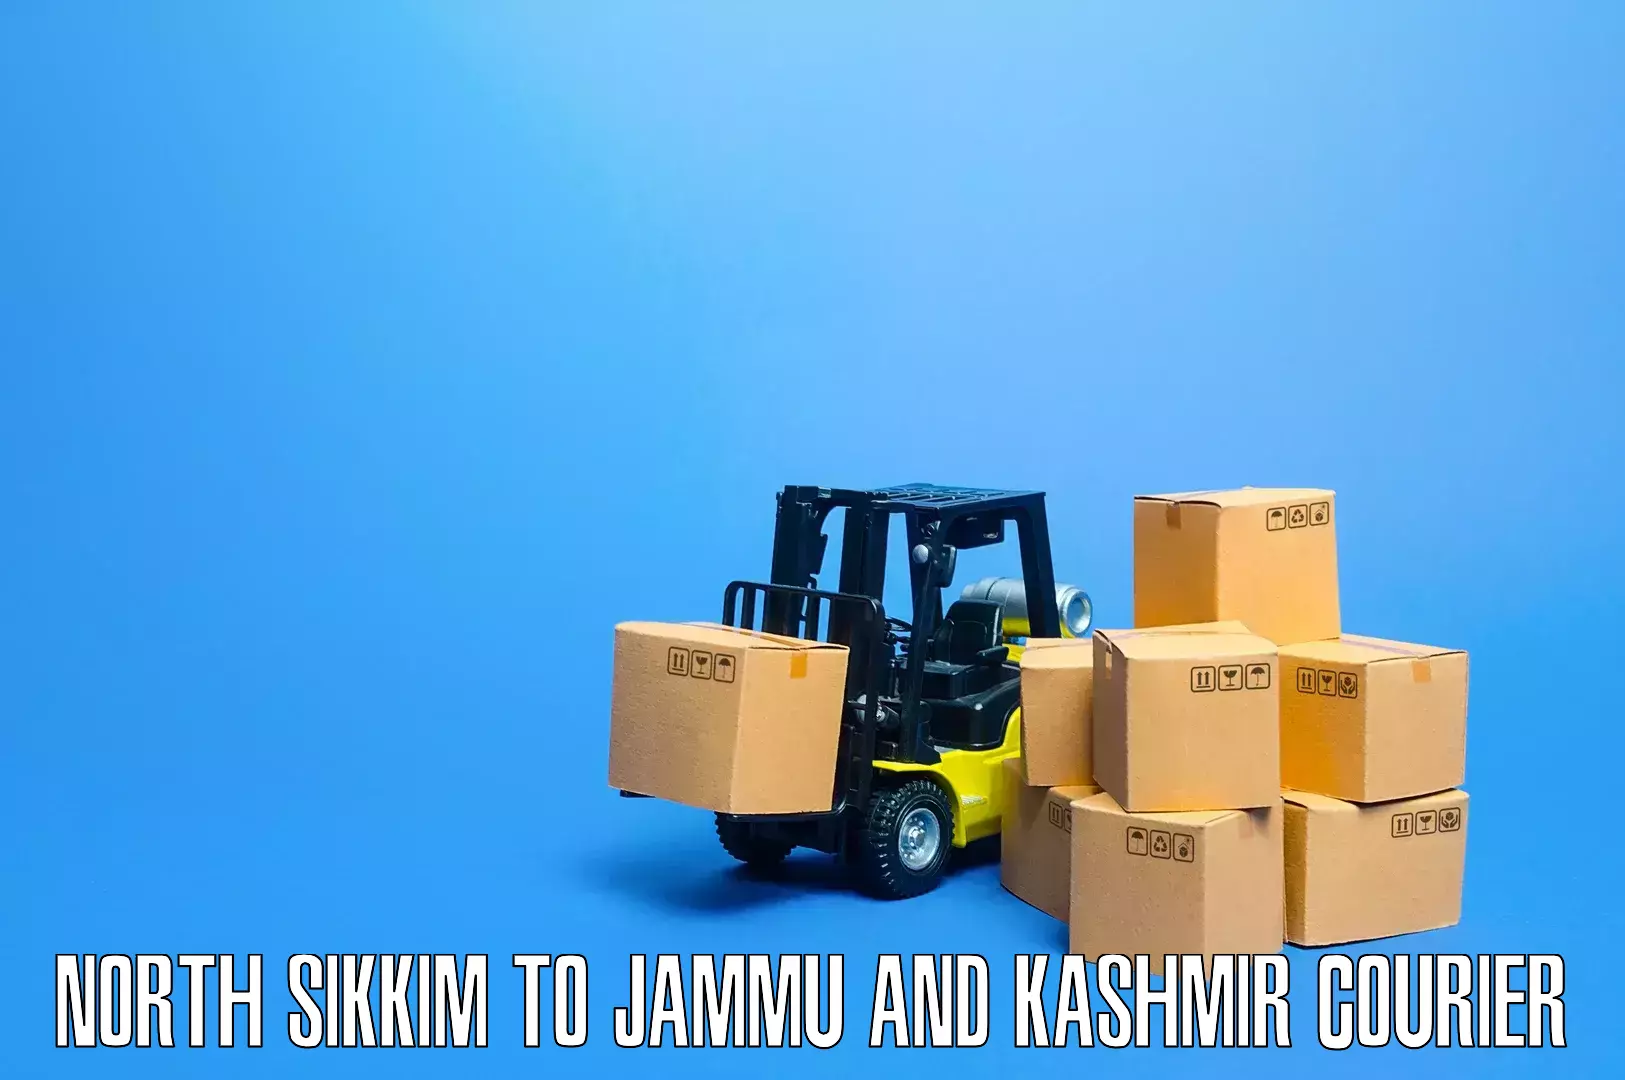 Expert goods movers North Sikkim to Jammu and Kashmir